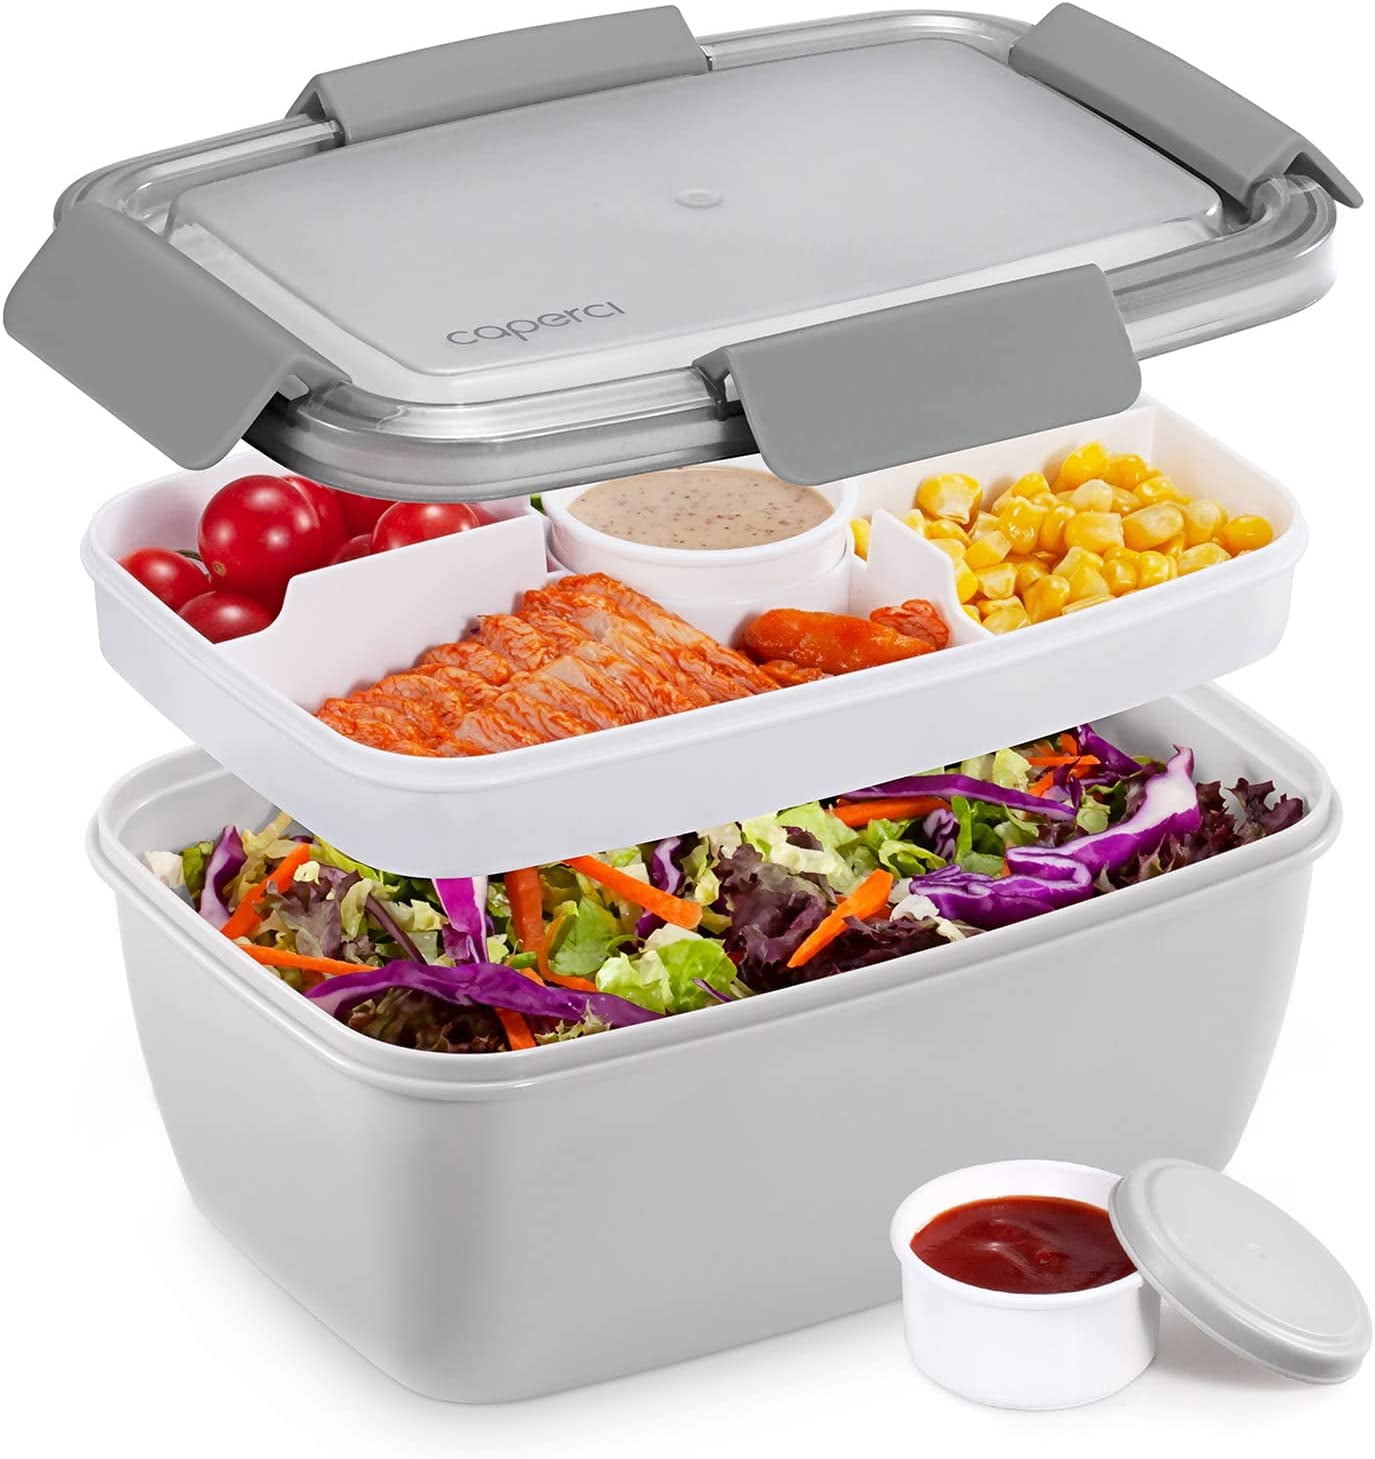 GiFBERA Large Salad Lunch Container - 68 oz Salad Bowl with 5 Compartments  Bento-Style Tray, 2 piece…See more GiFBERA Large Salad Lunch Container - 68